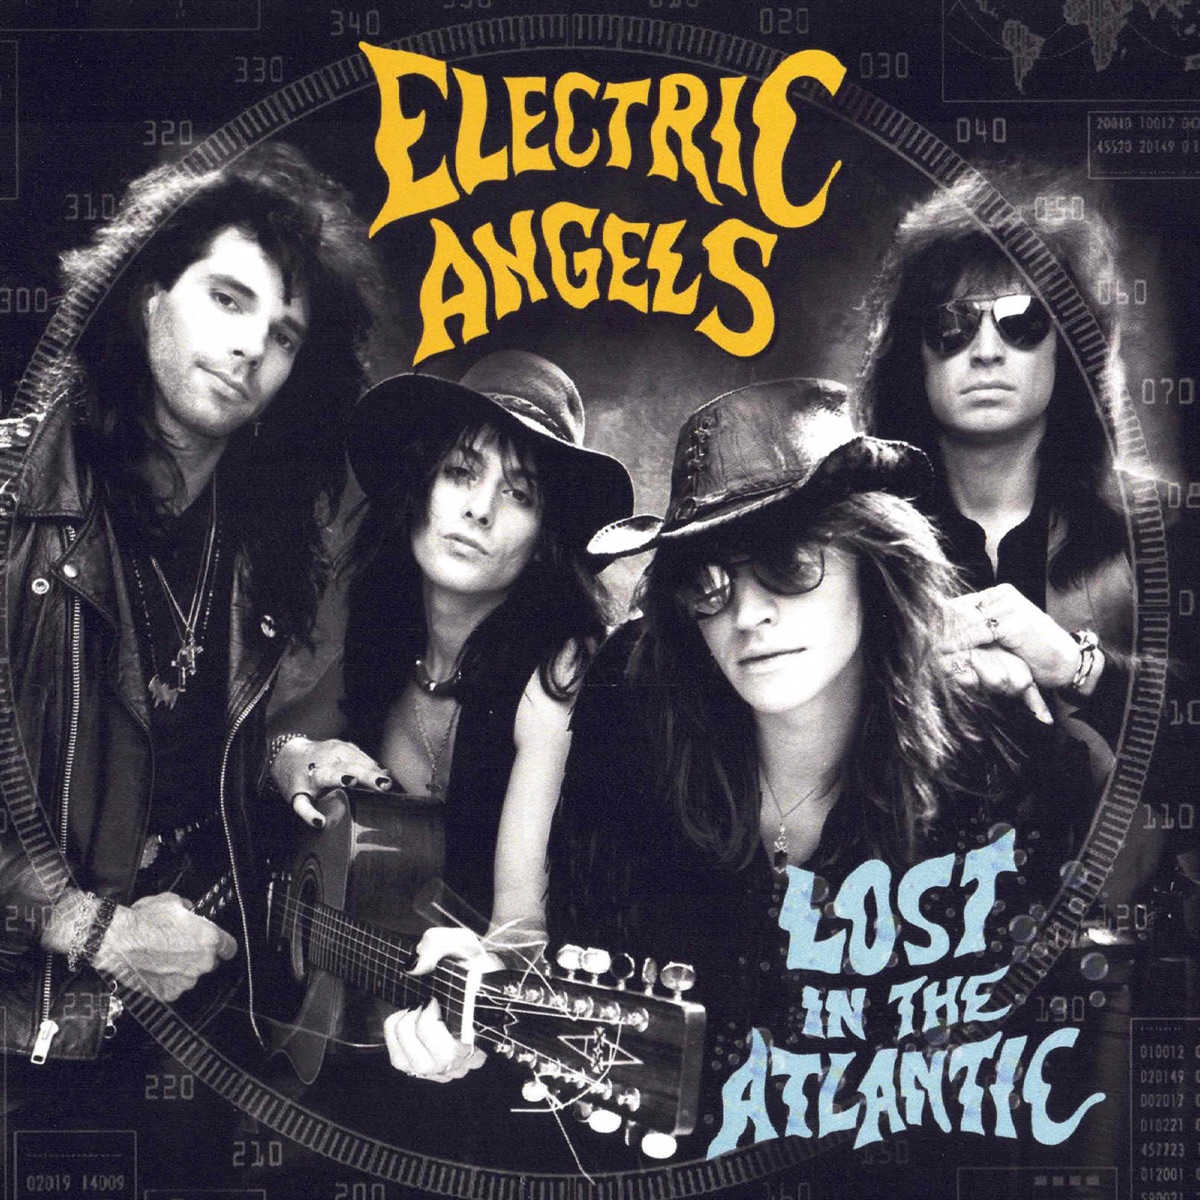 Art for Wish I Could Fly by Electric Angels